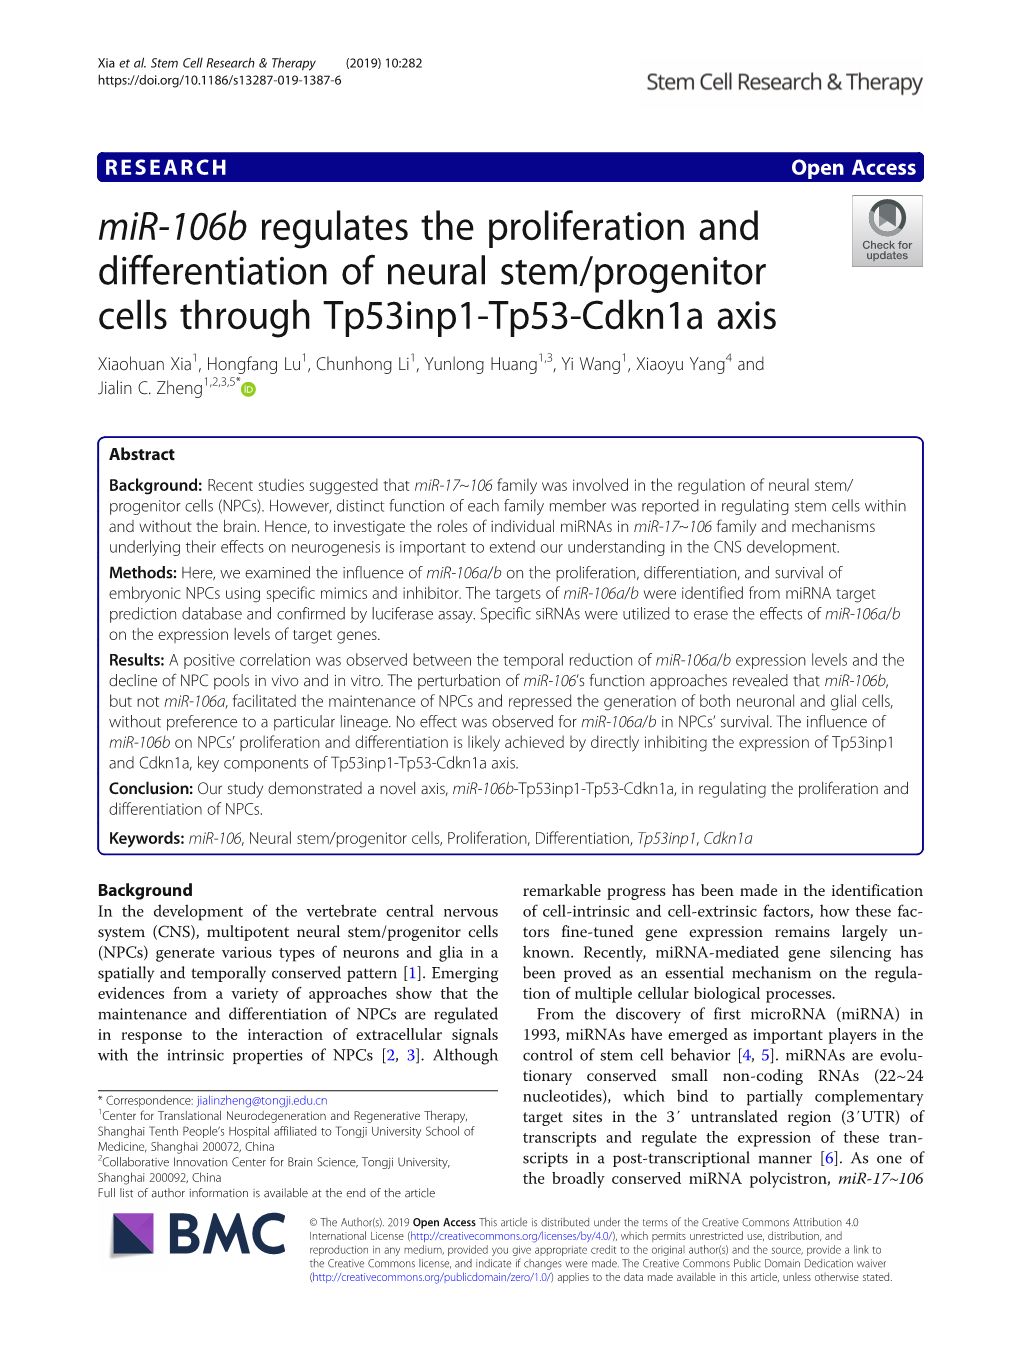 Mir-106B Regulates the Proliferation and Differentiation of Neural Stem/Progenitor Cells Through Tp53inp1-Tp53-Cdkn1a Axis